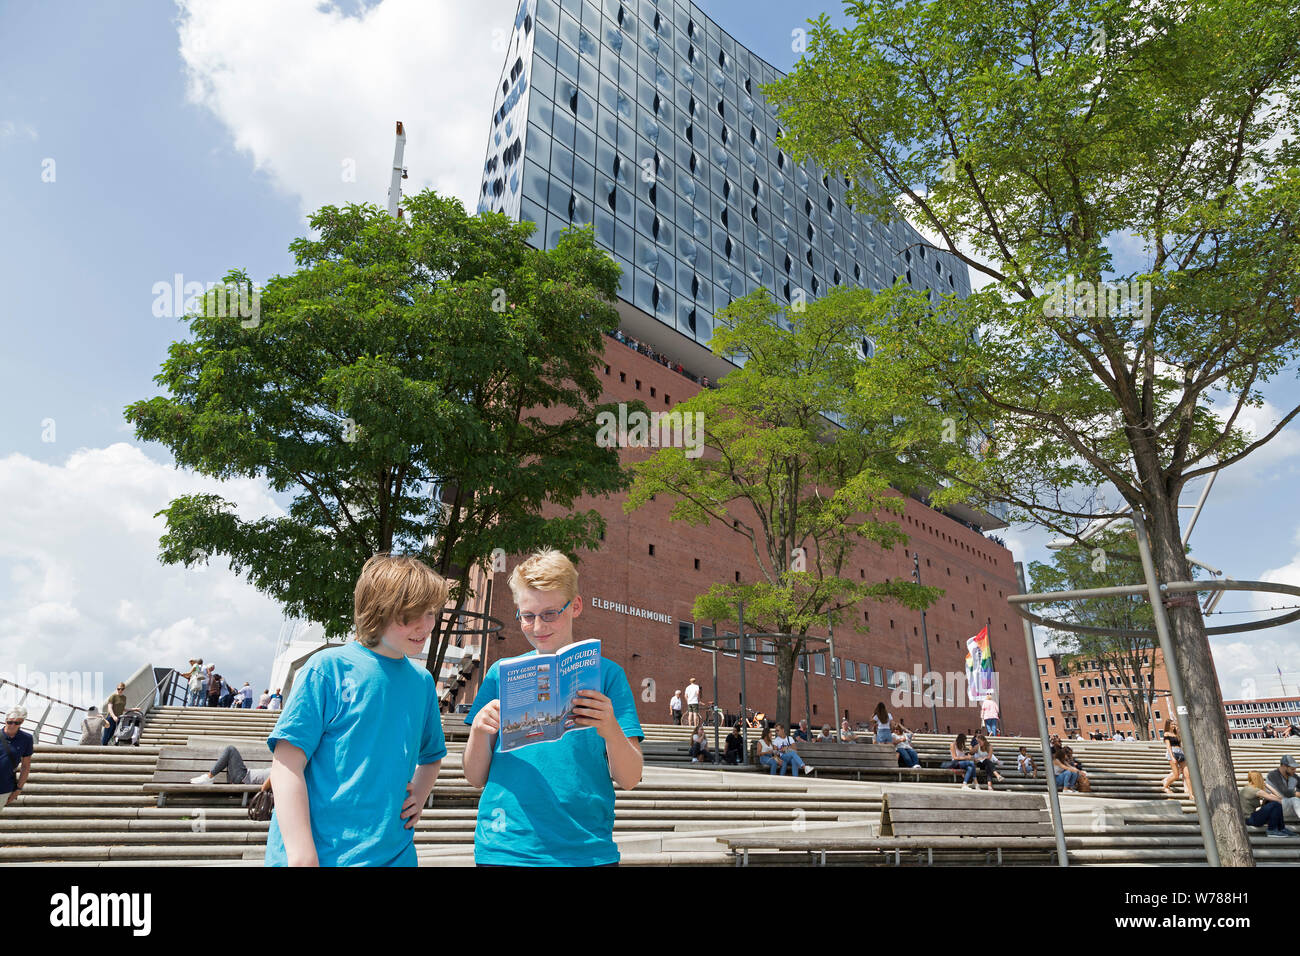 teenagers during language study travel studying their city guide in front of Elbe Philharmonic Hall, Hamburg, Germany Stock Photo